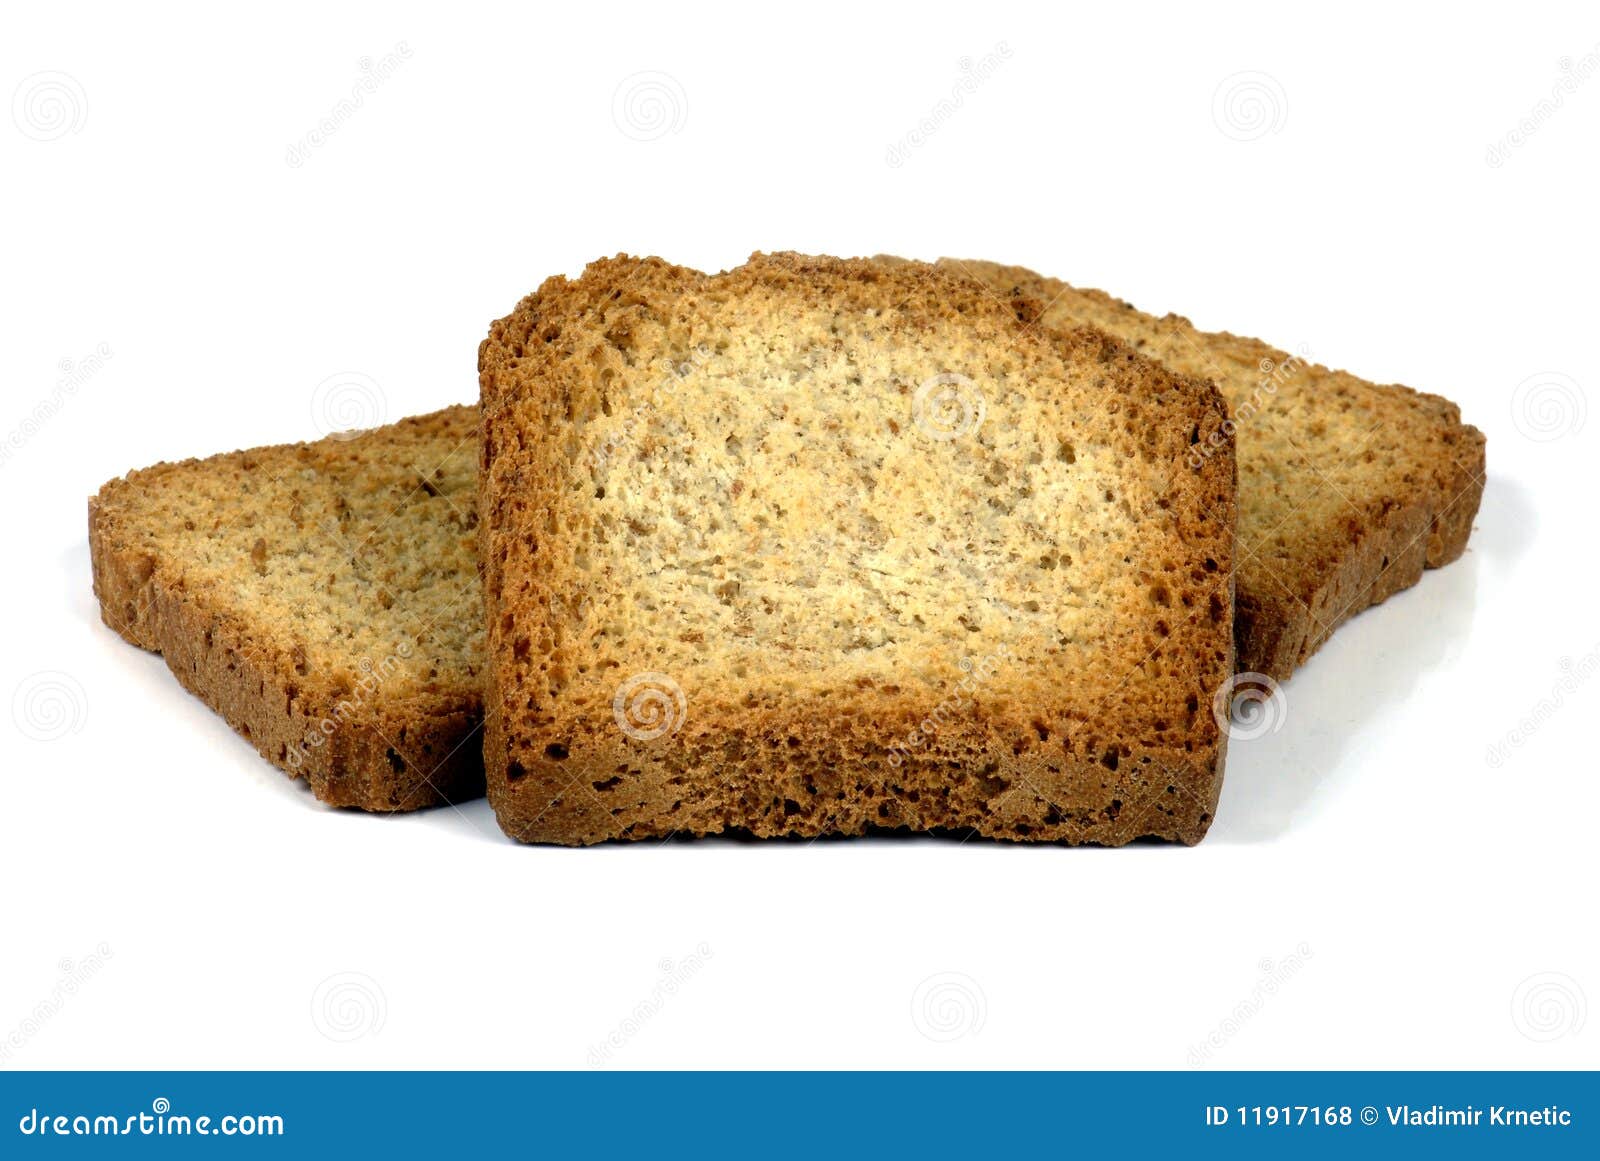 Toasted bread slices. Three toasted slices of bread isolated on a white background.